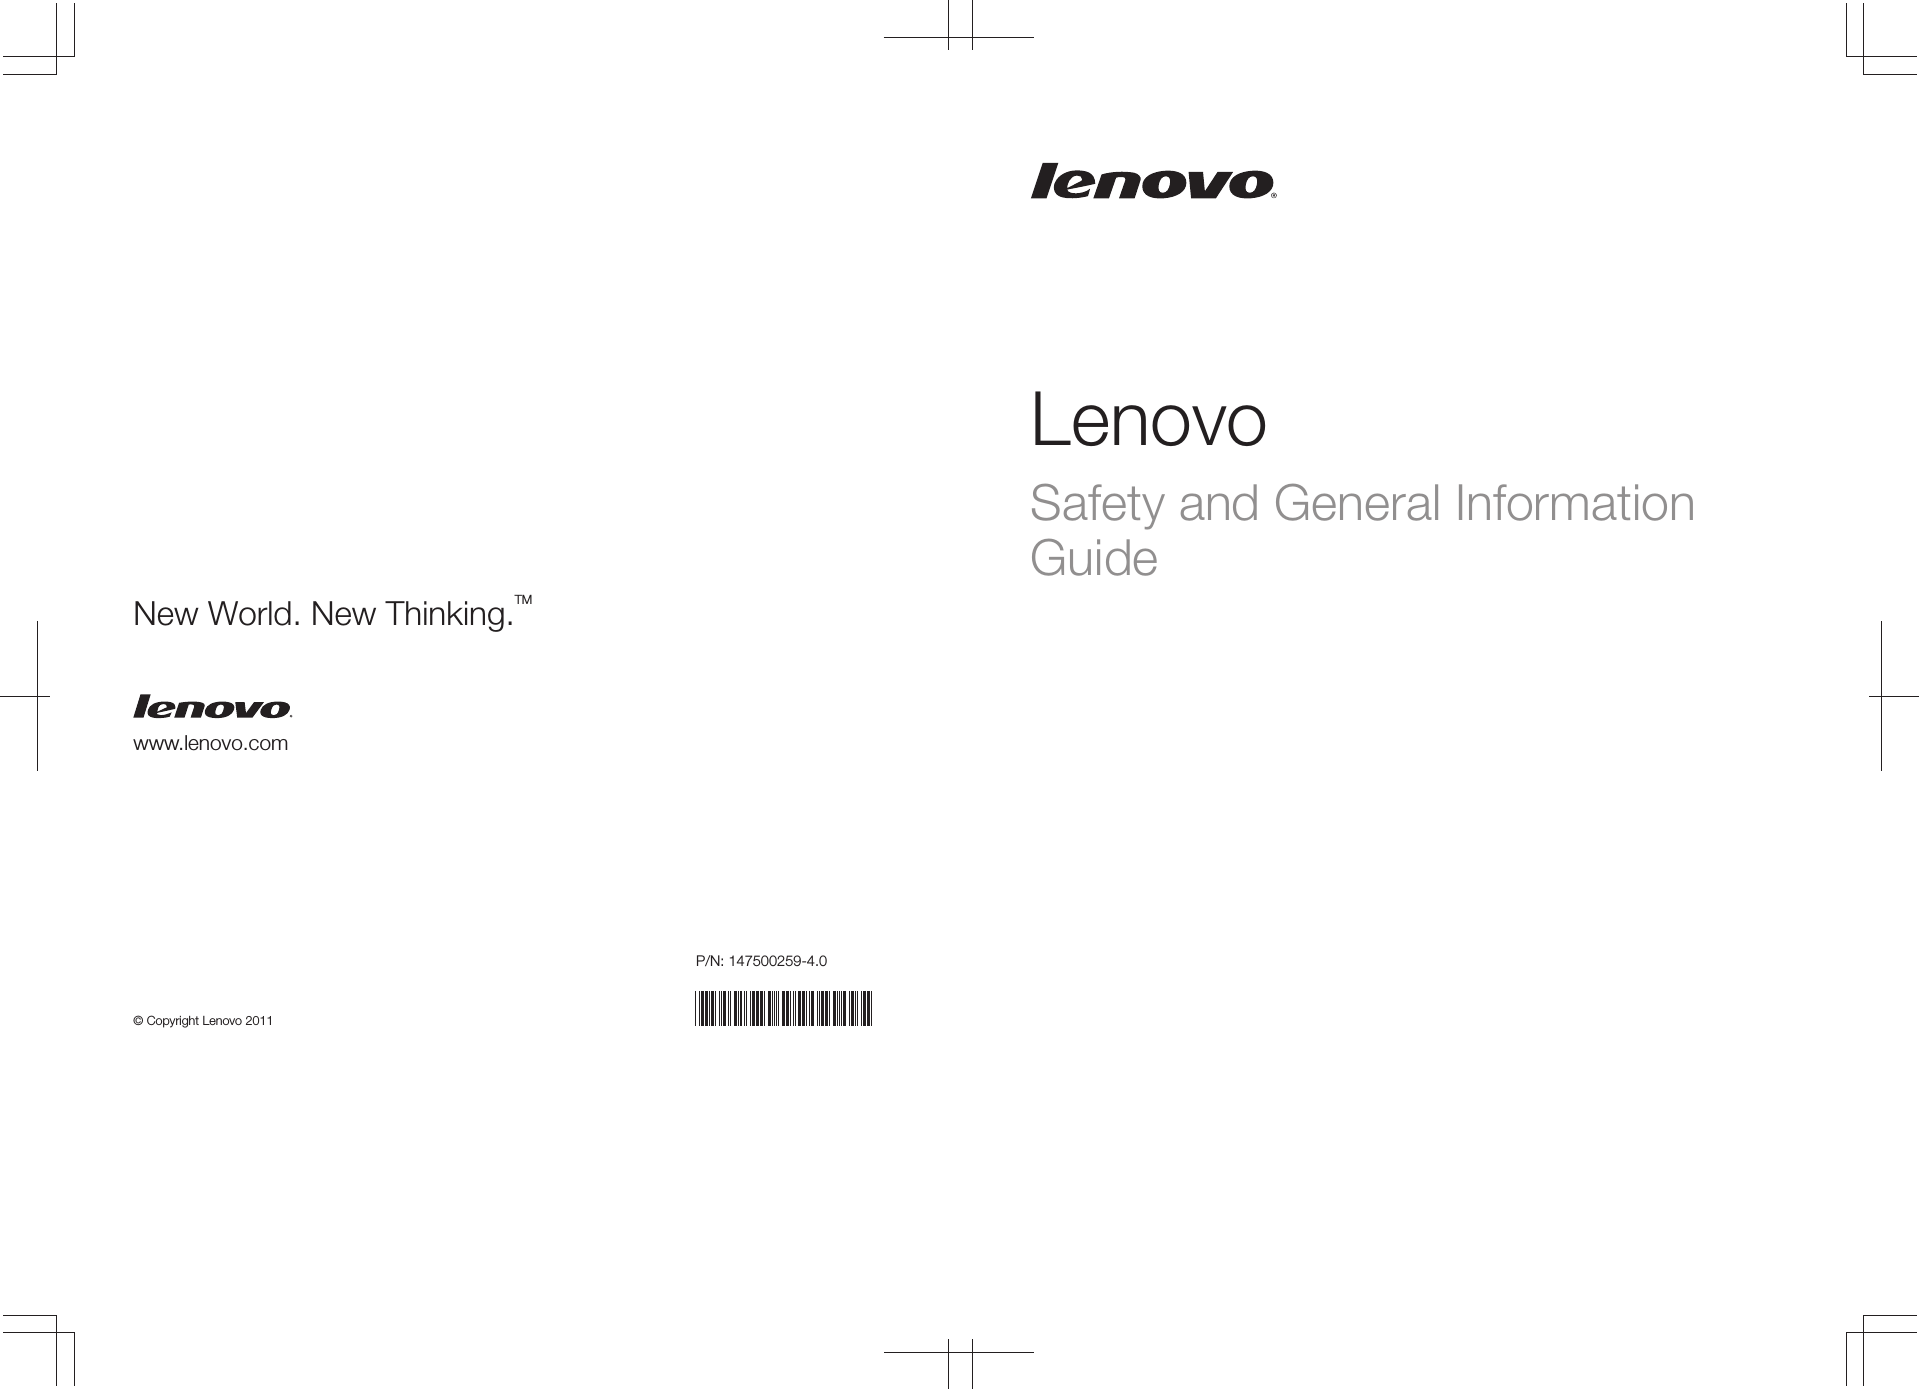 P/N: 147500259-4.0© Copyright Lenovo 2011LenovoSafety and General Information Guidewww.lenovo.comNew World. New Thinking.TM